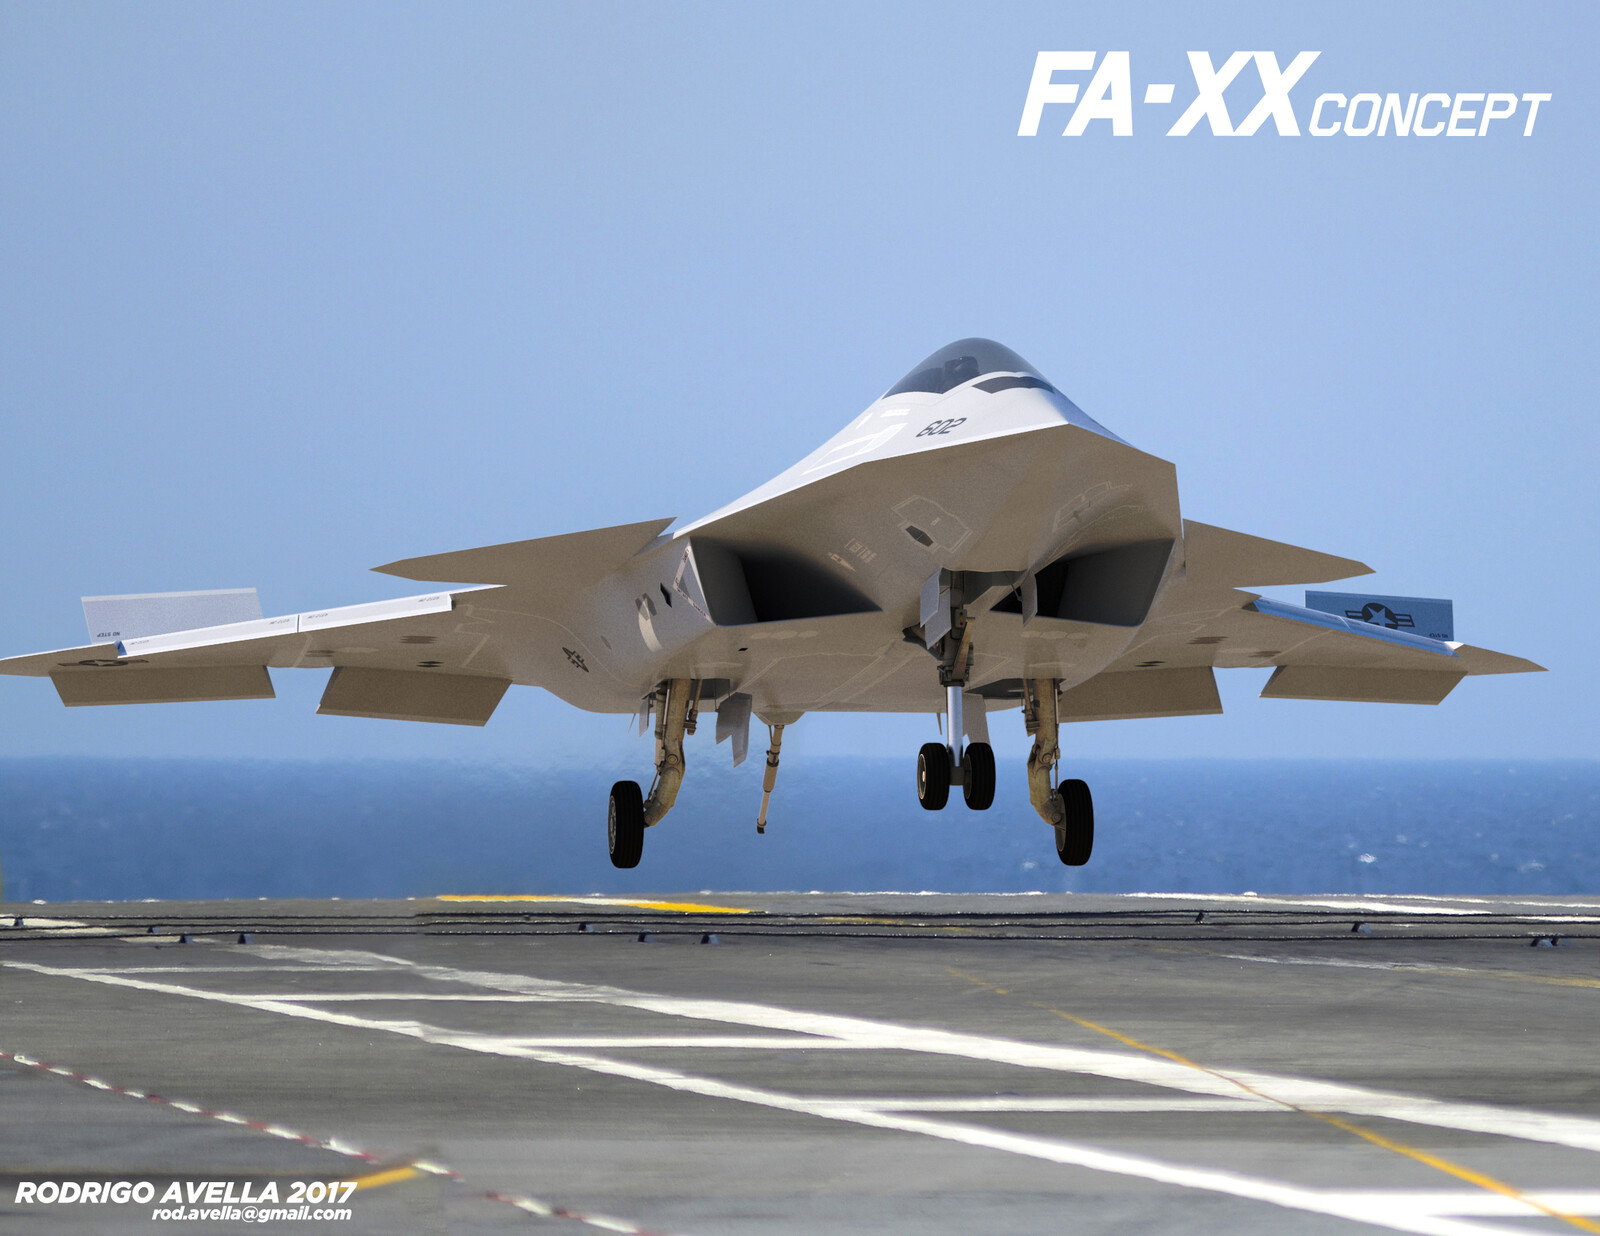 Sixth Generation F/A-XX Fighter